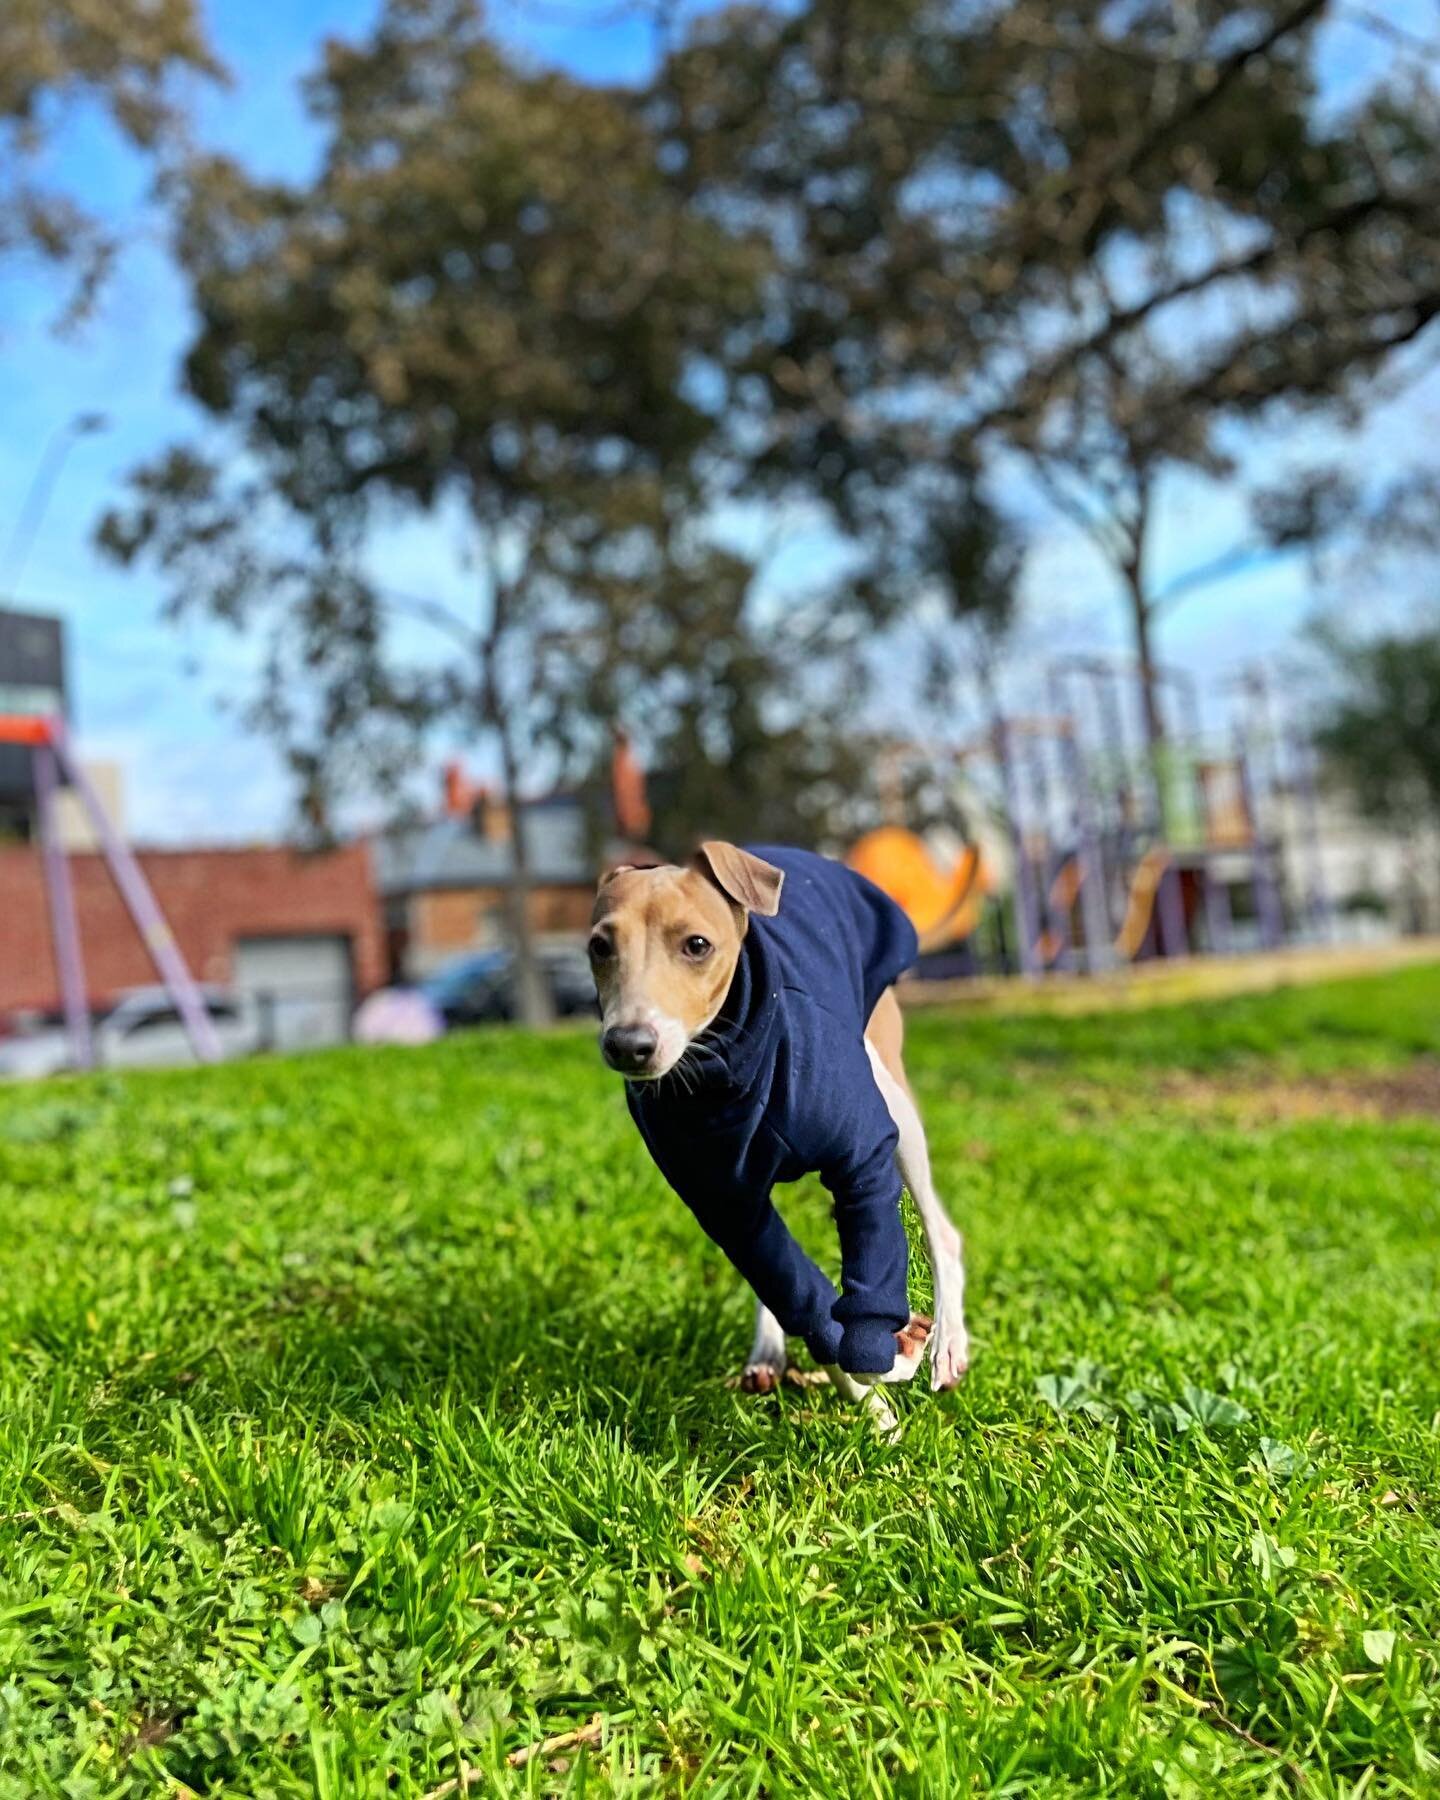 You better have burst mode on because I ain&rsquo;t staying in the frame for long. 
.
.
.
.
#dogs #dogsofinstagram #dogsofmelbourne #italiangreyhound #italiangreyhoundsofinstagram #italiangreyhounds #iggylife #dogphotography #dogphoto #dogwalkersofme